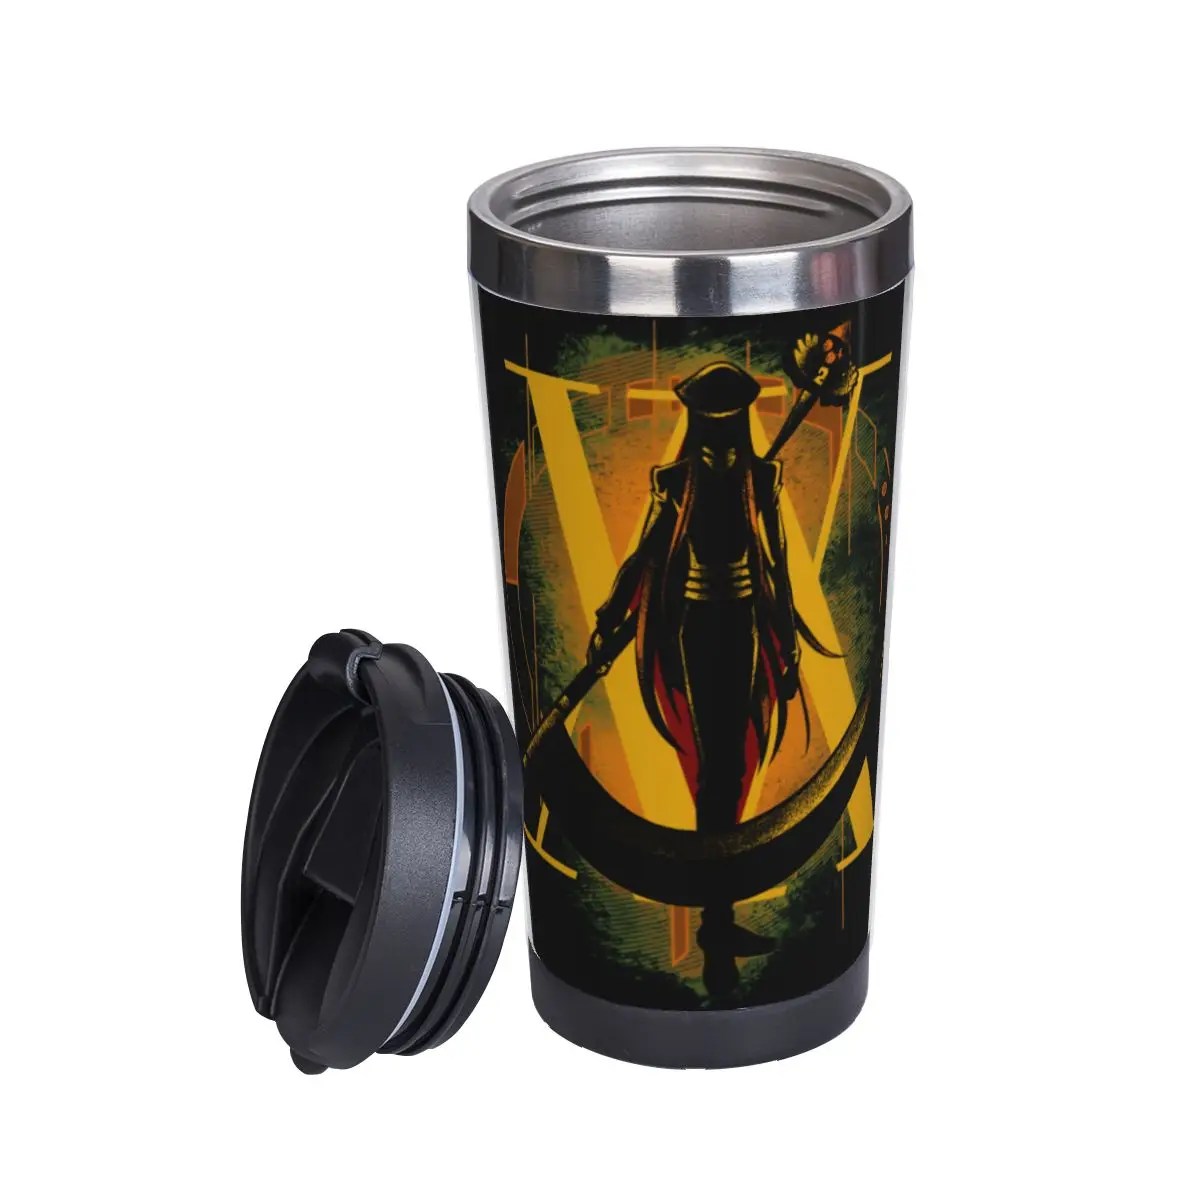 Kite Hxh Kite Hunter X Hunterst Double Insulated Water Cup Cute Thermos bottle Mug Humor Graphic Heat Insulation tea cups